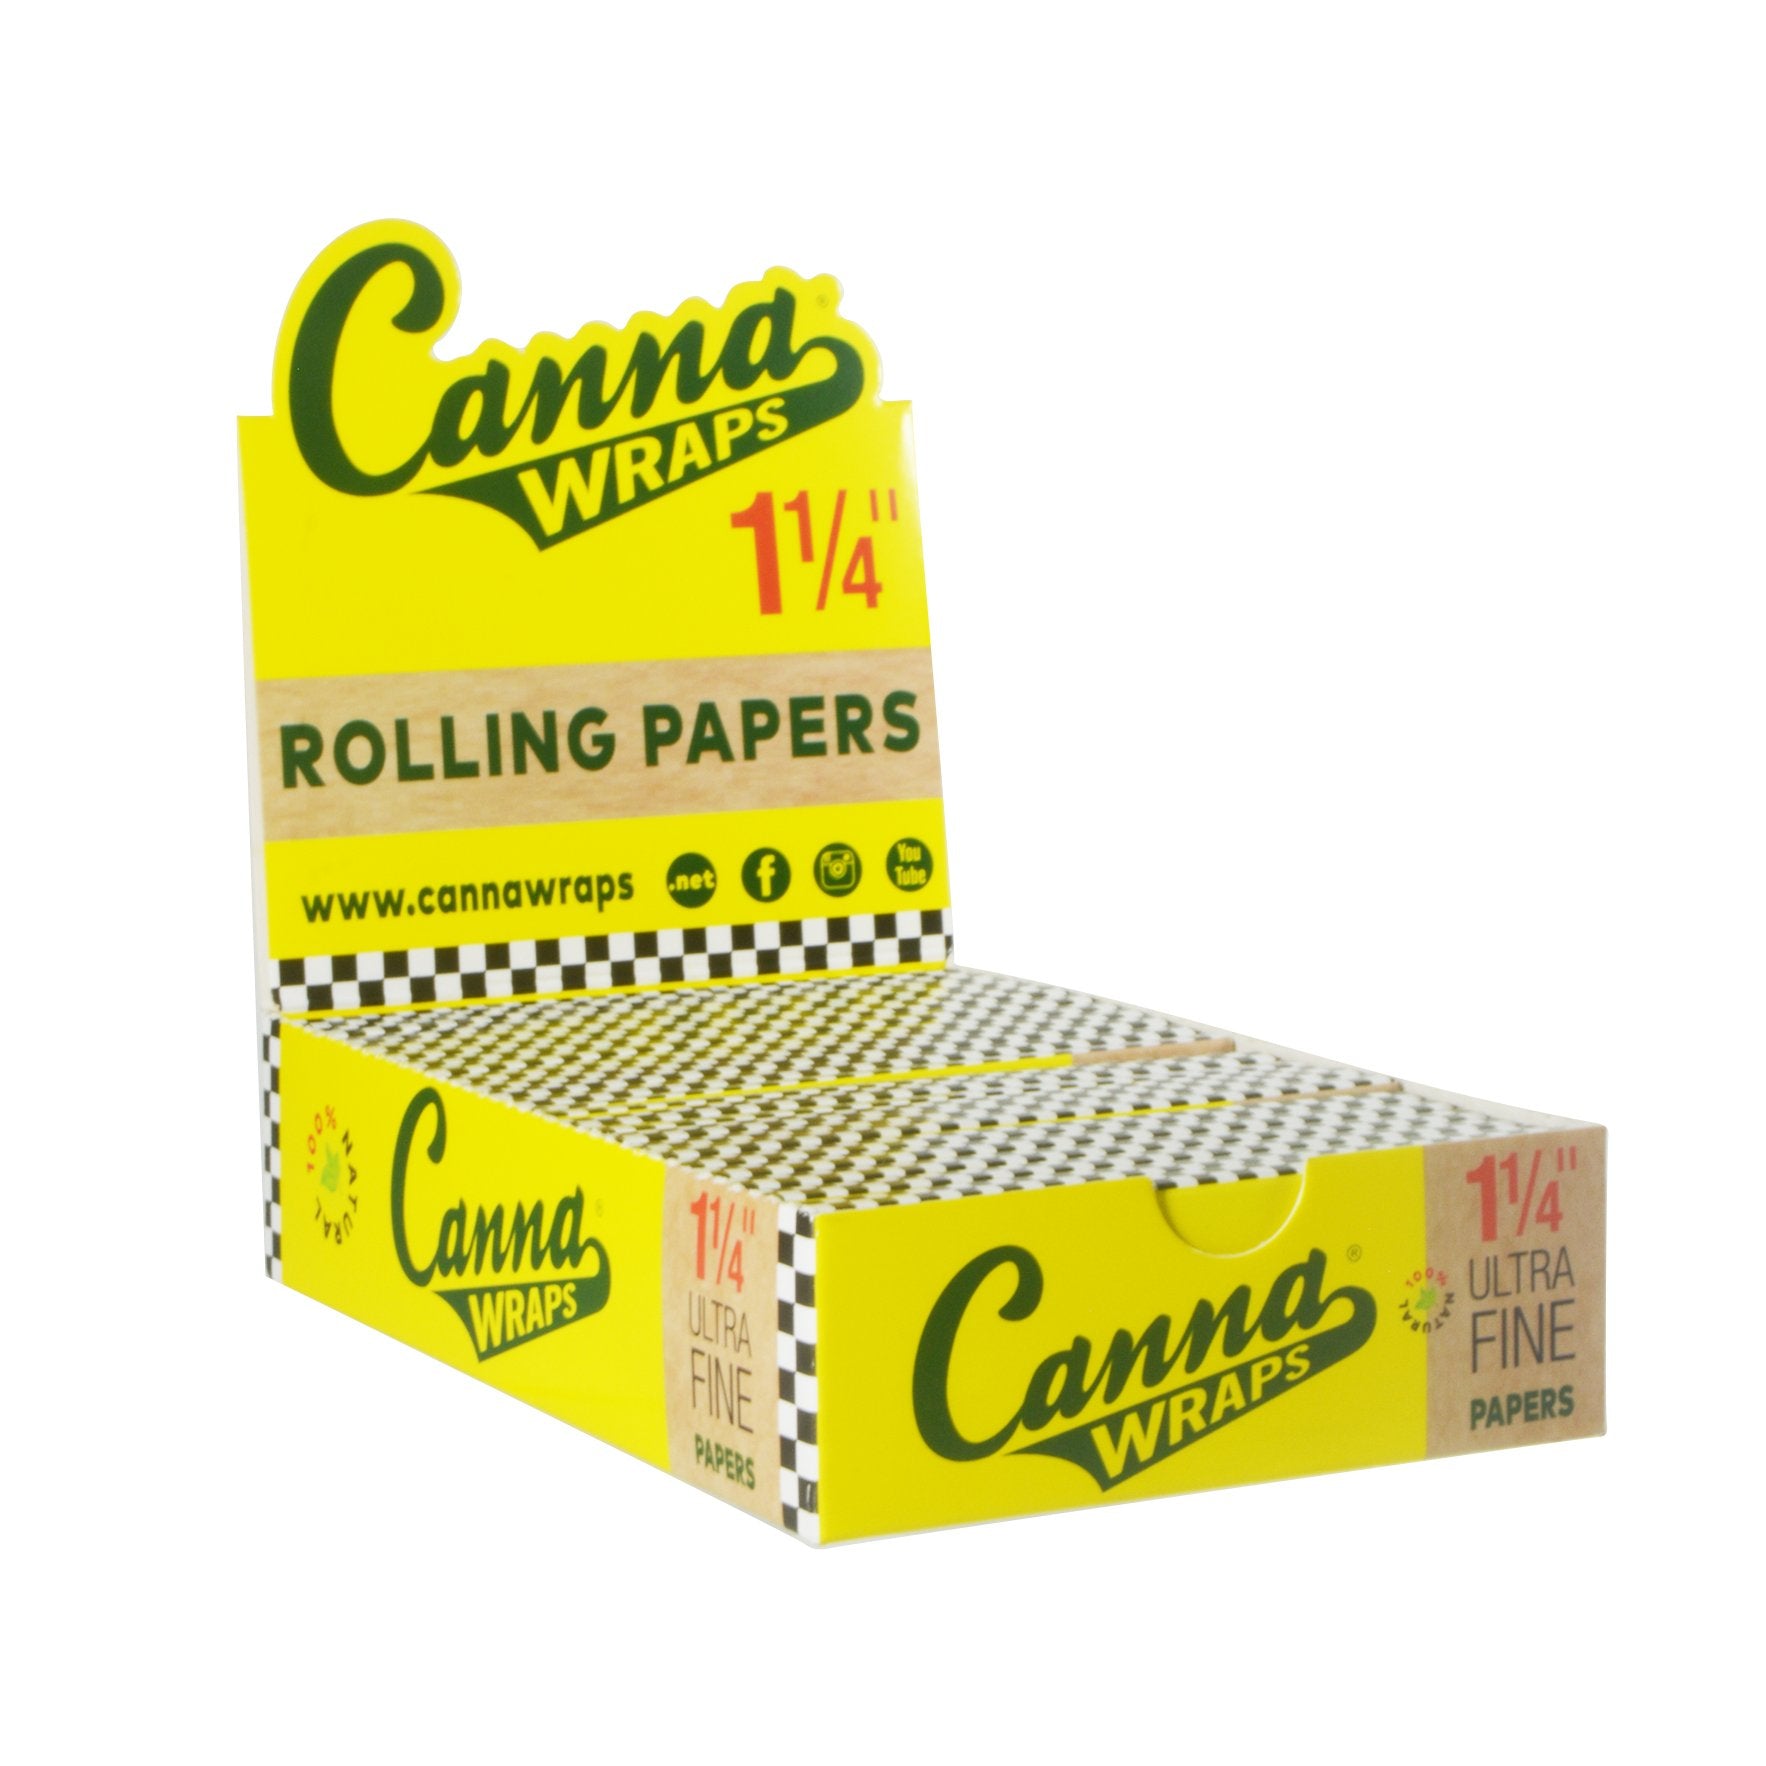 CANNA WRAPS | 'Retail Display' 1 1/4 Size Natural Rolling Papers | 83mm - Ultra Fine - 25 Count - 1